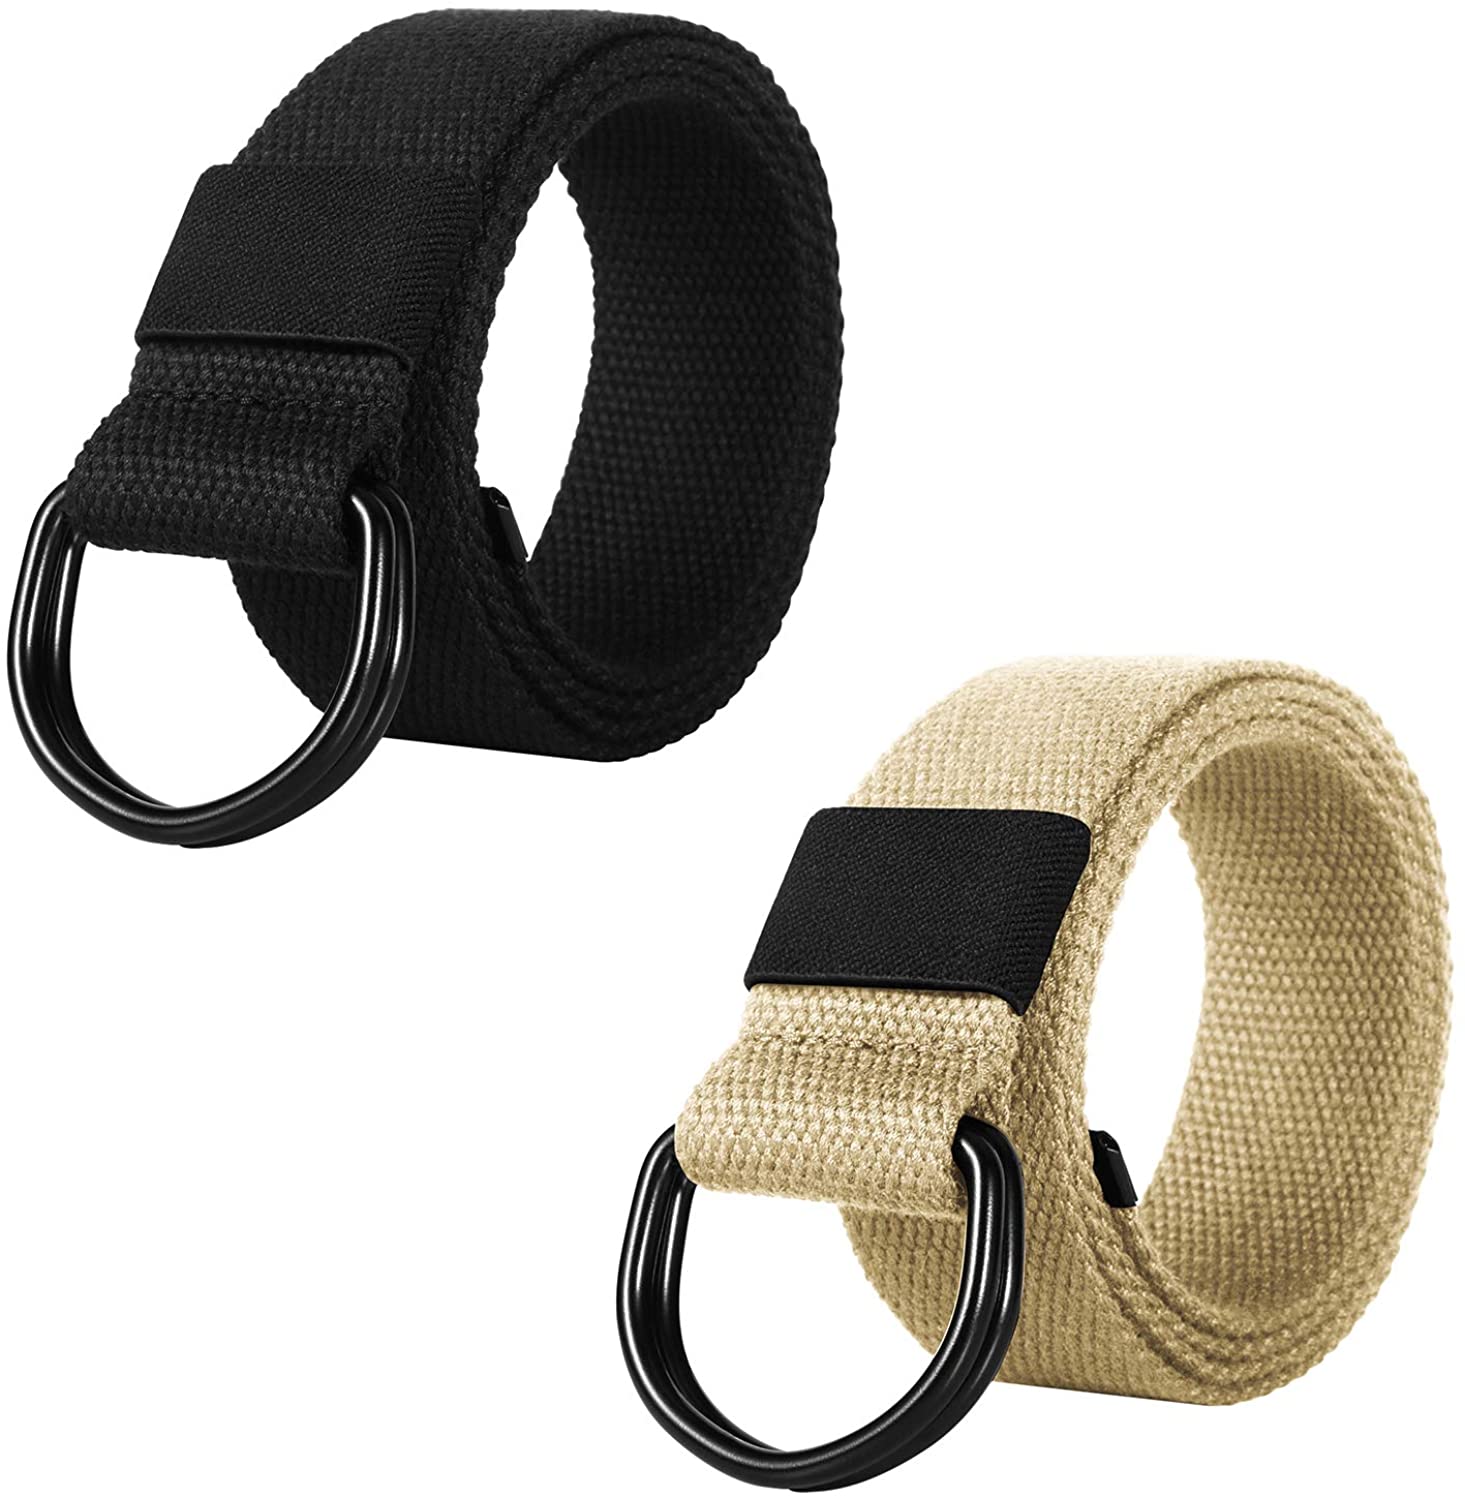 How to Put on a Cloth Belt With Two Metal Rings